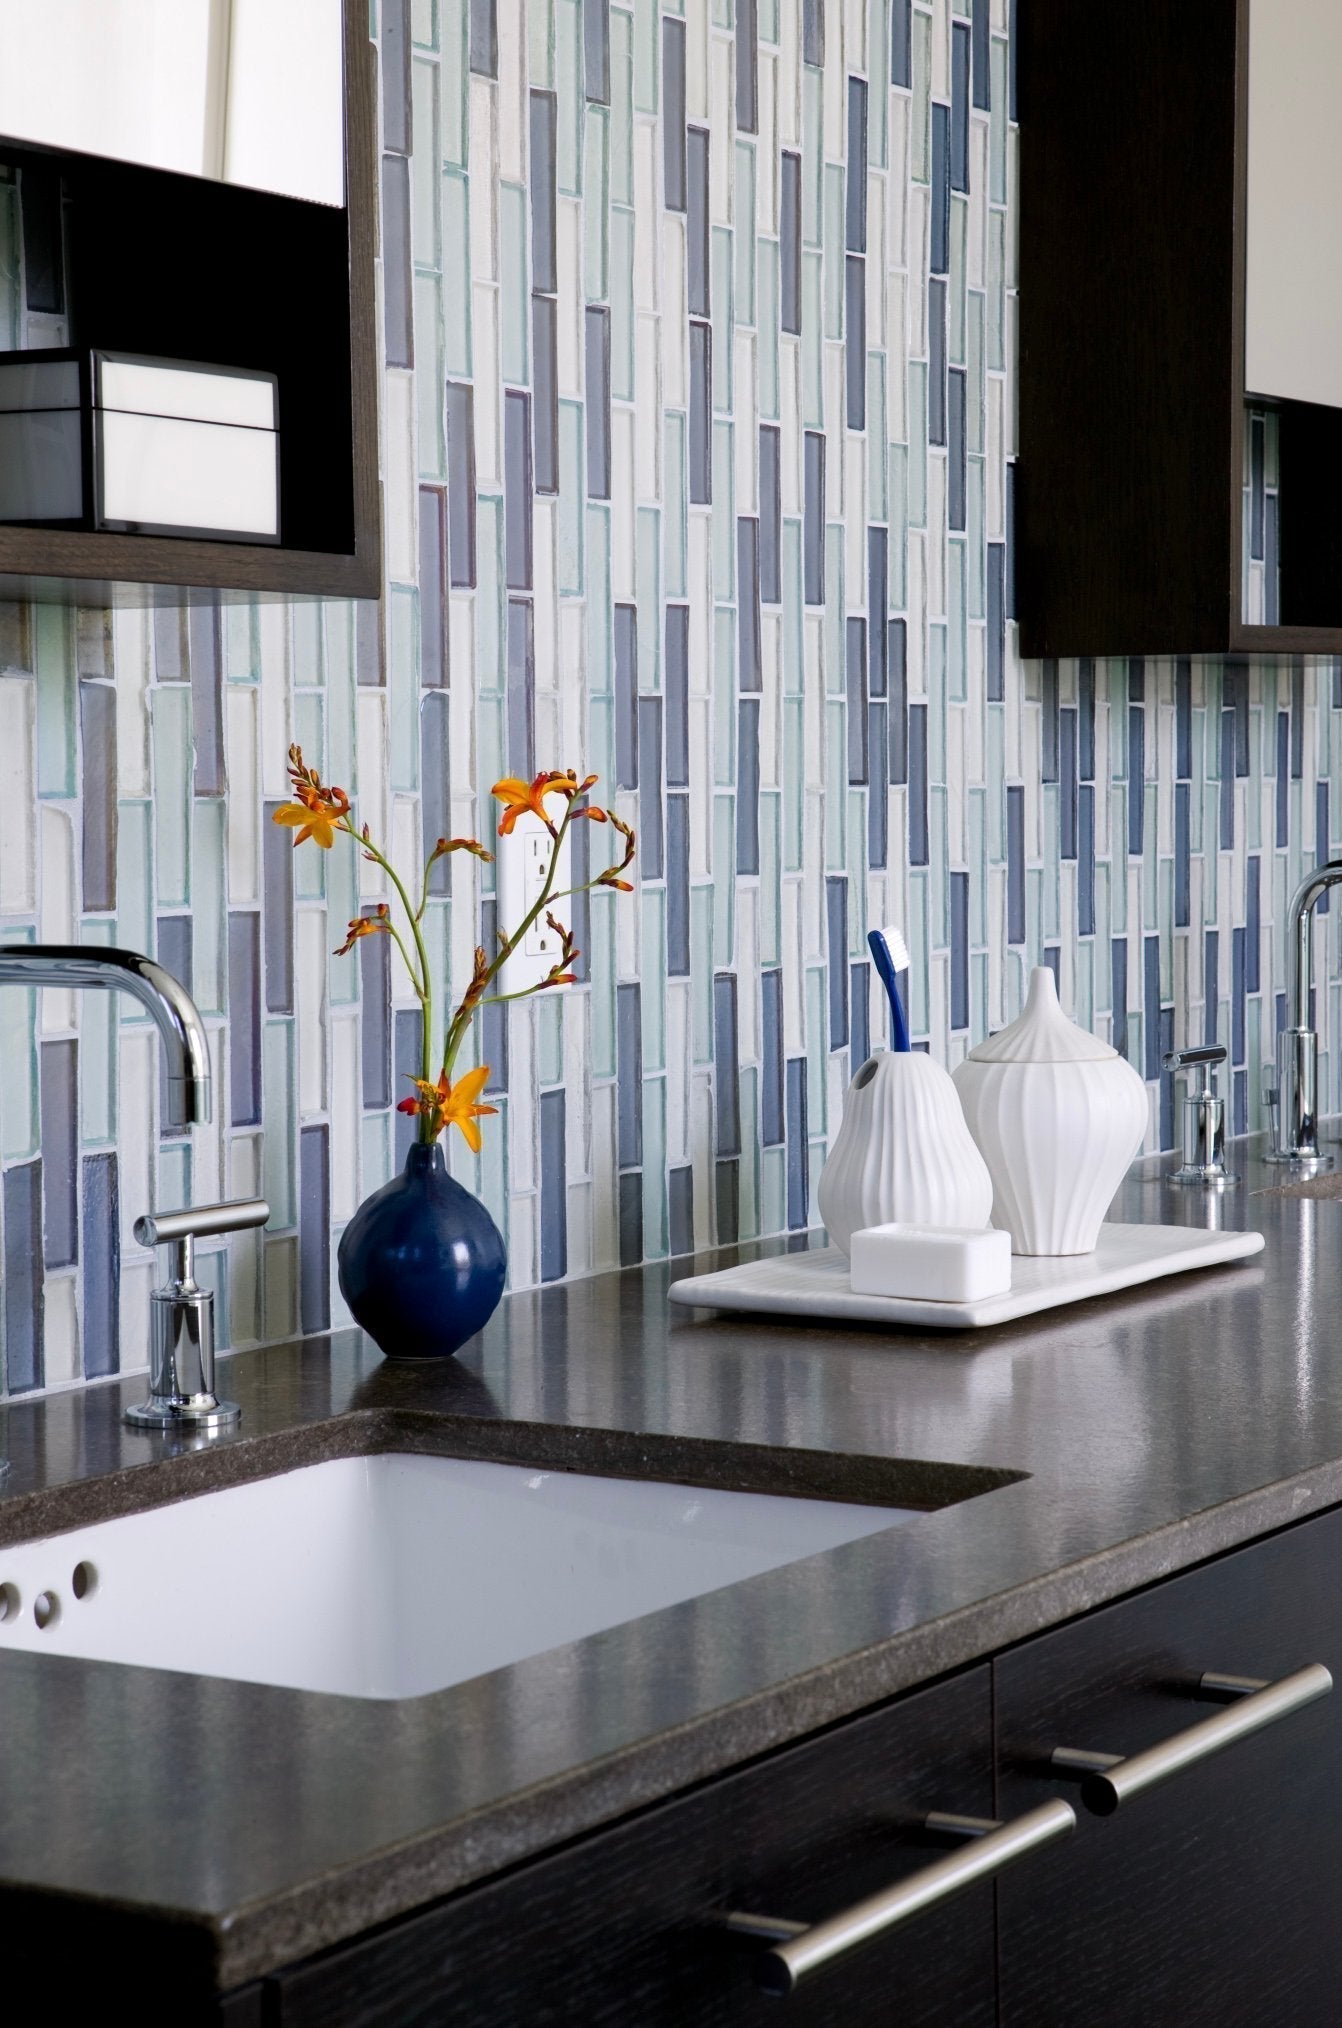 Things You Must Know About Mosaic Tile Backsplash